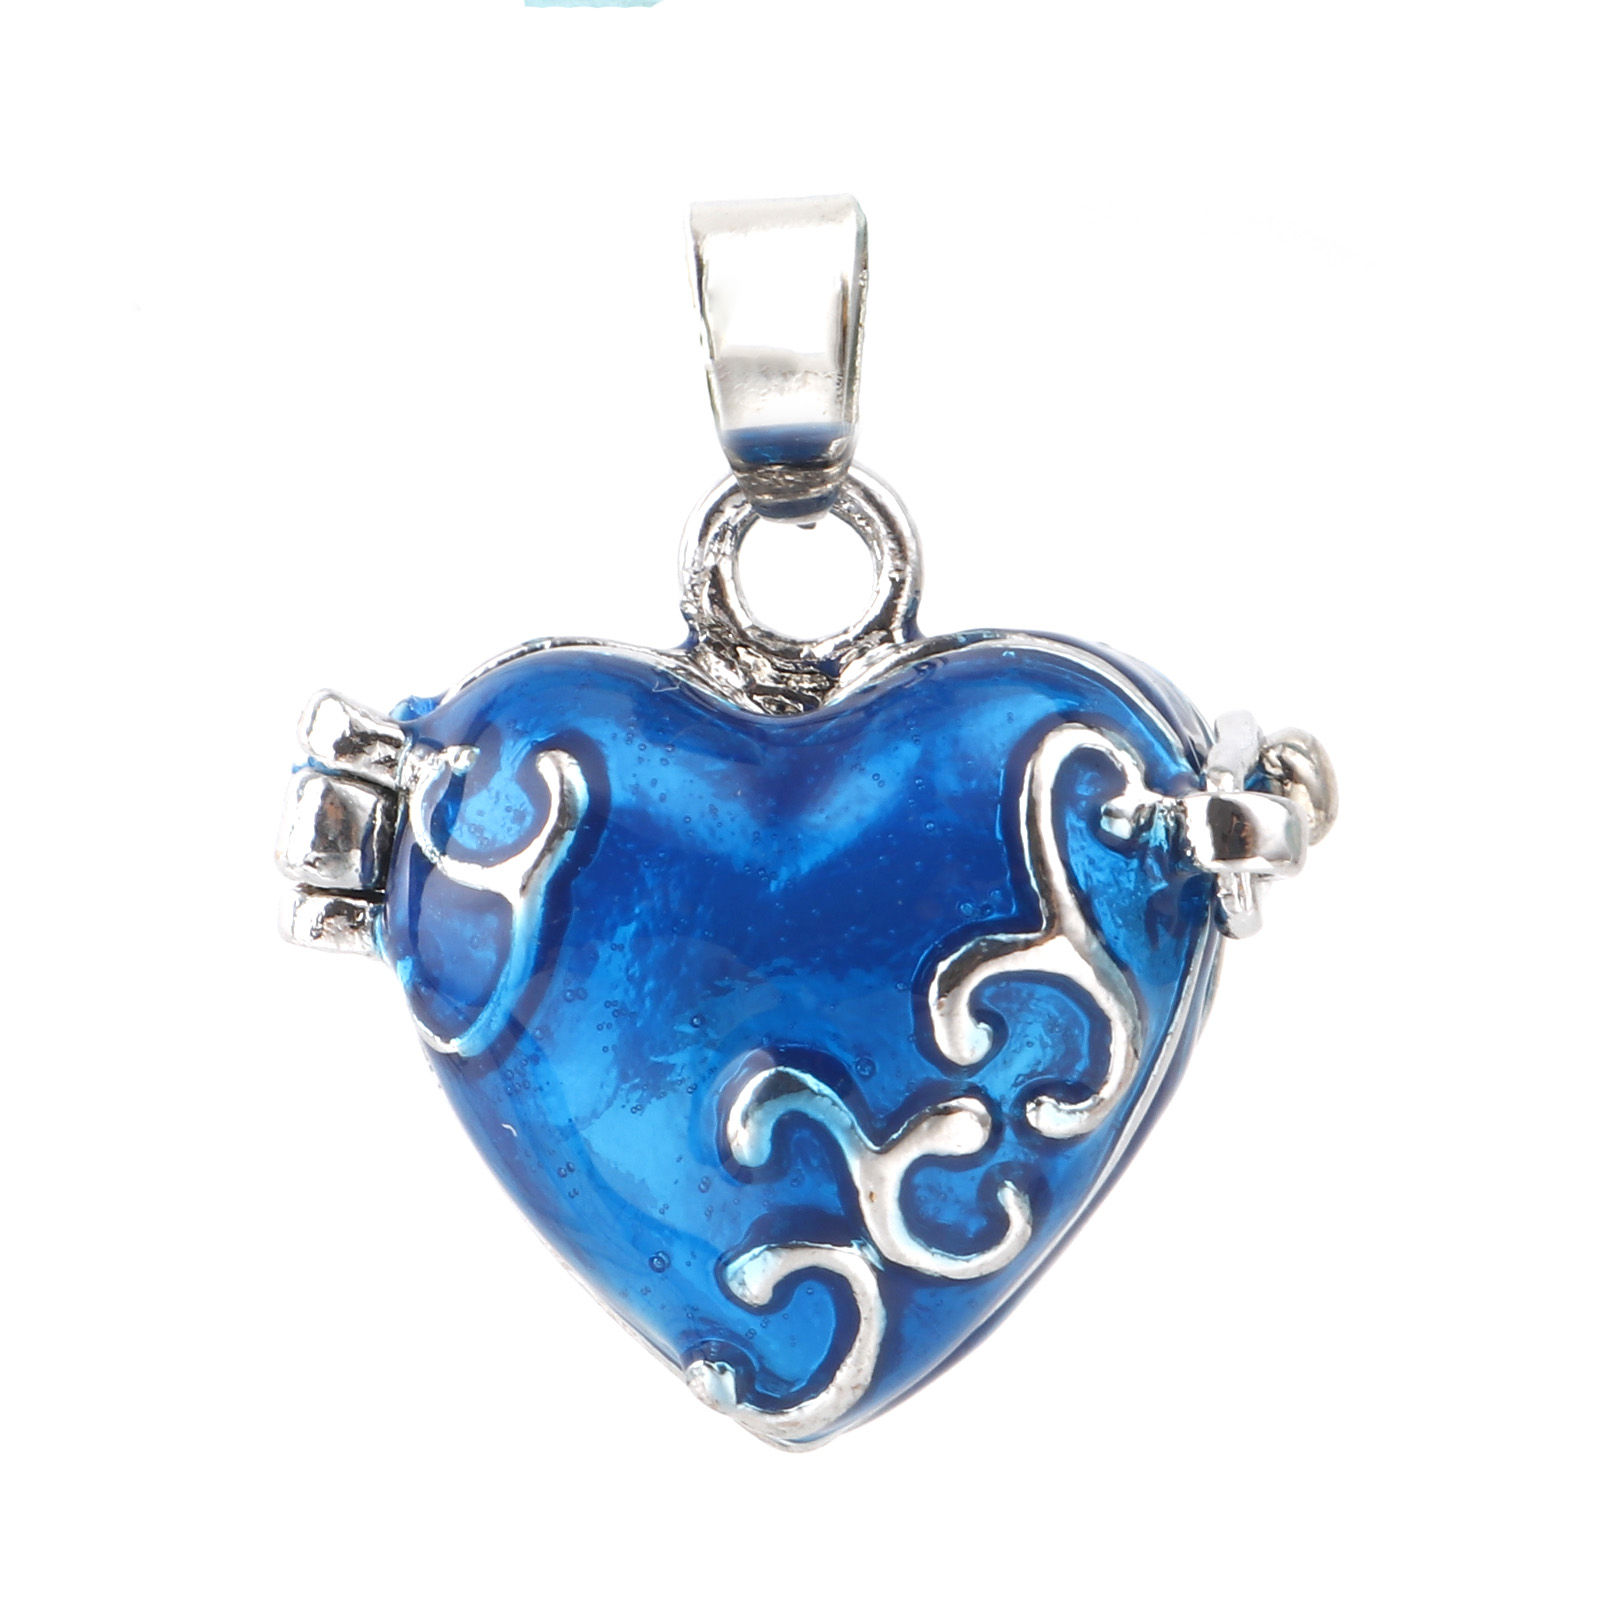 Picture of Copper Charms Mexican Angel Caller Bola Harmony Ball Wish Box Locket Heart Carved Pattern Silver Tone Blue Enamel Can Open 25mm x 21mm, 1 Piece